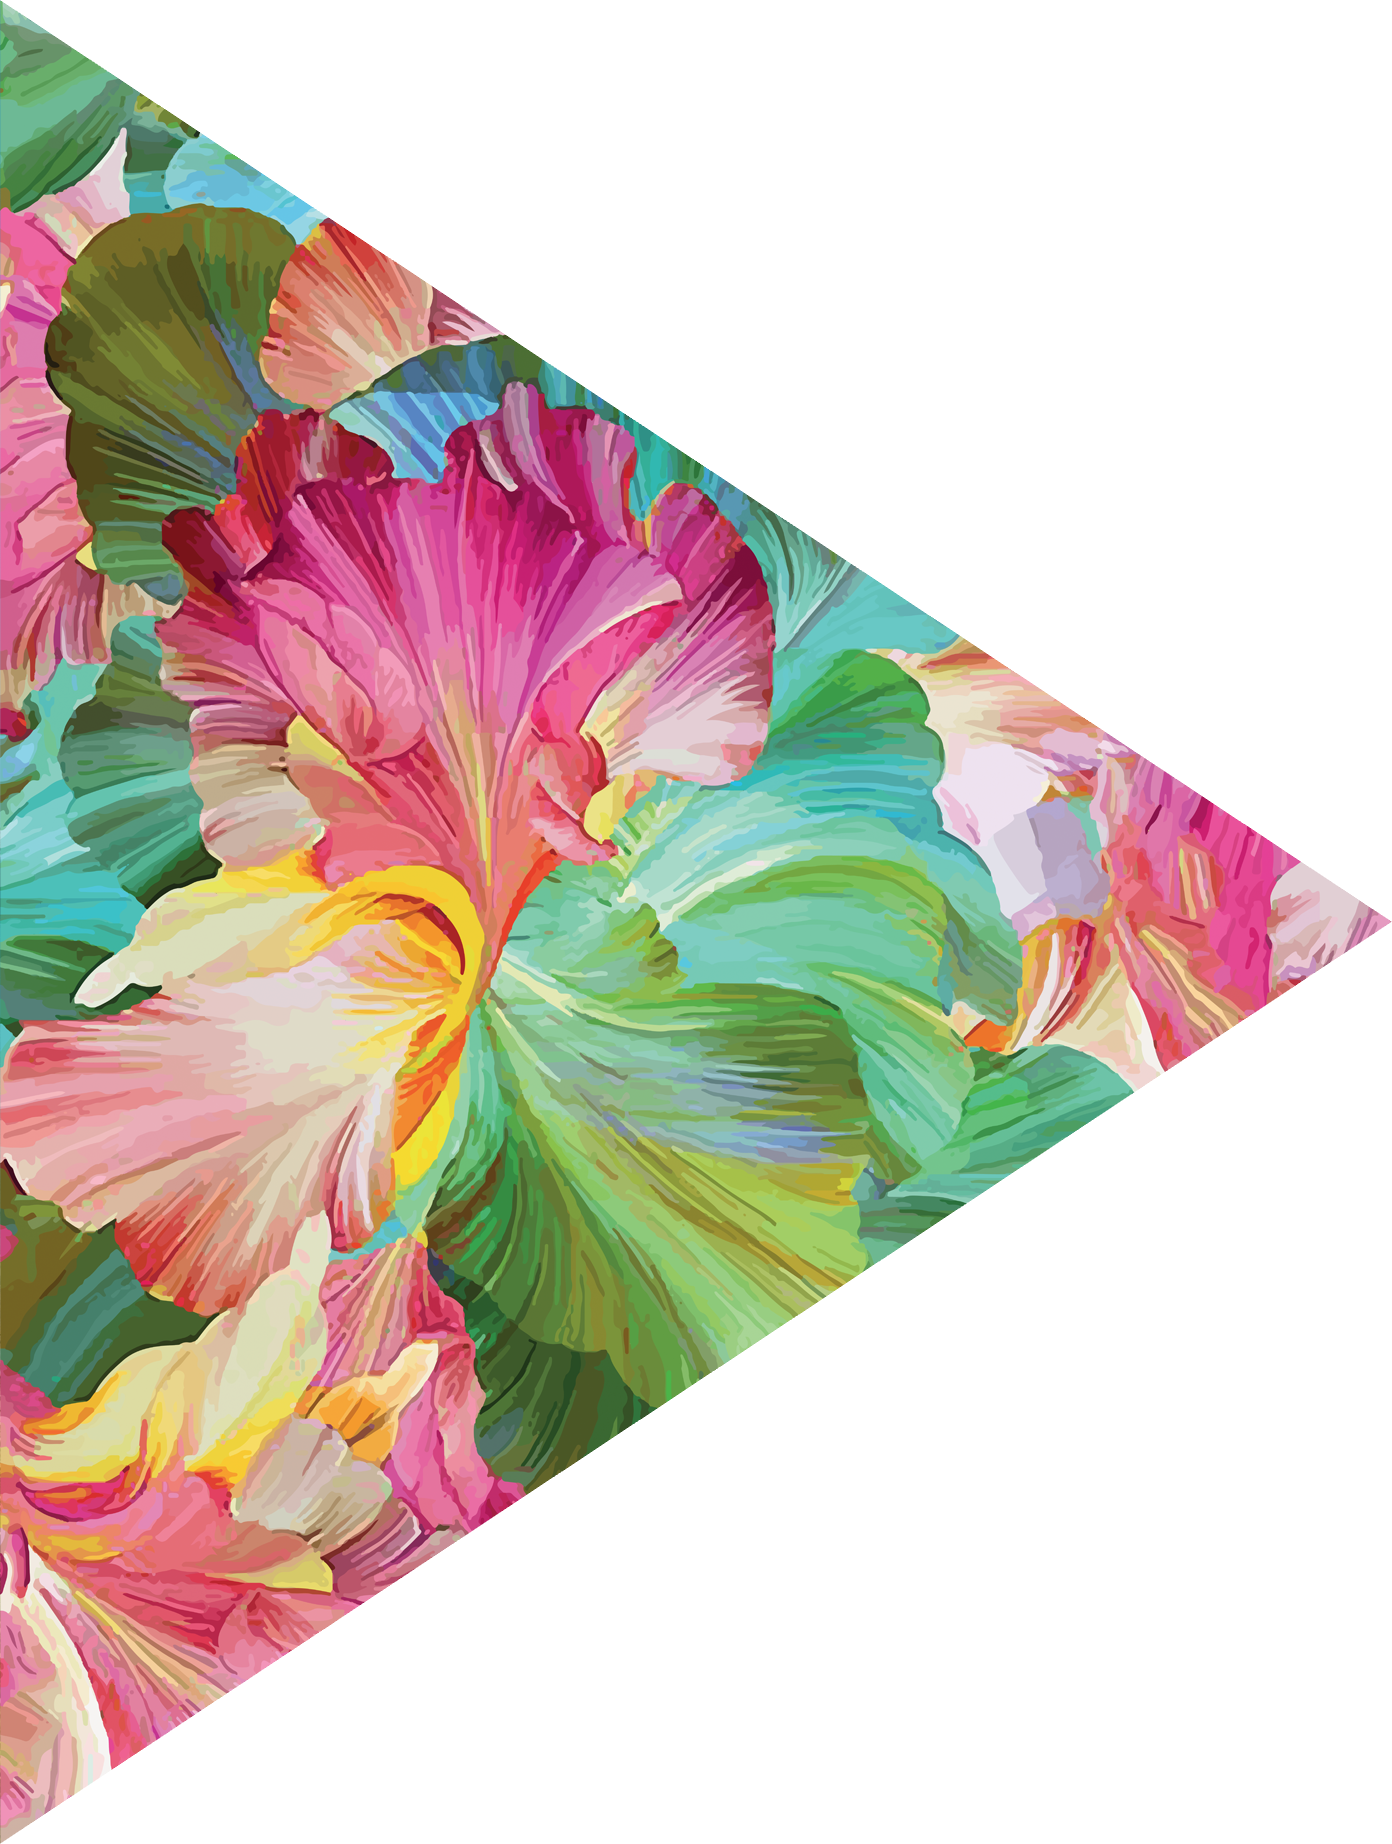 floral pattern of intertwined intricate leaves in pink, green and yellow. Abstract leaf design